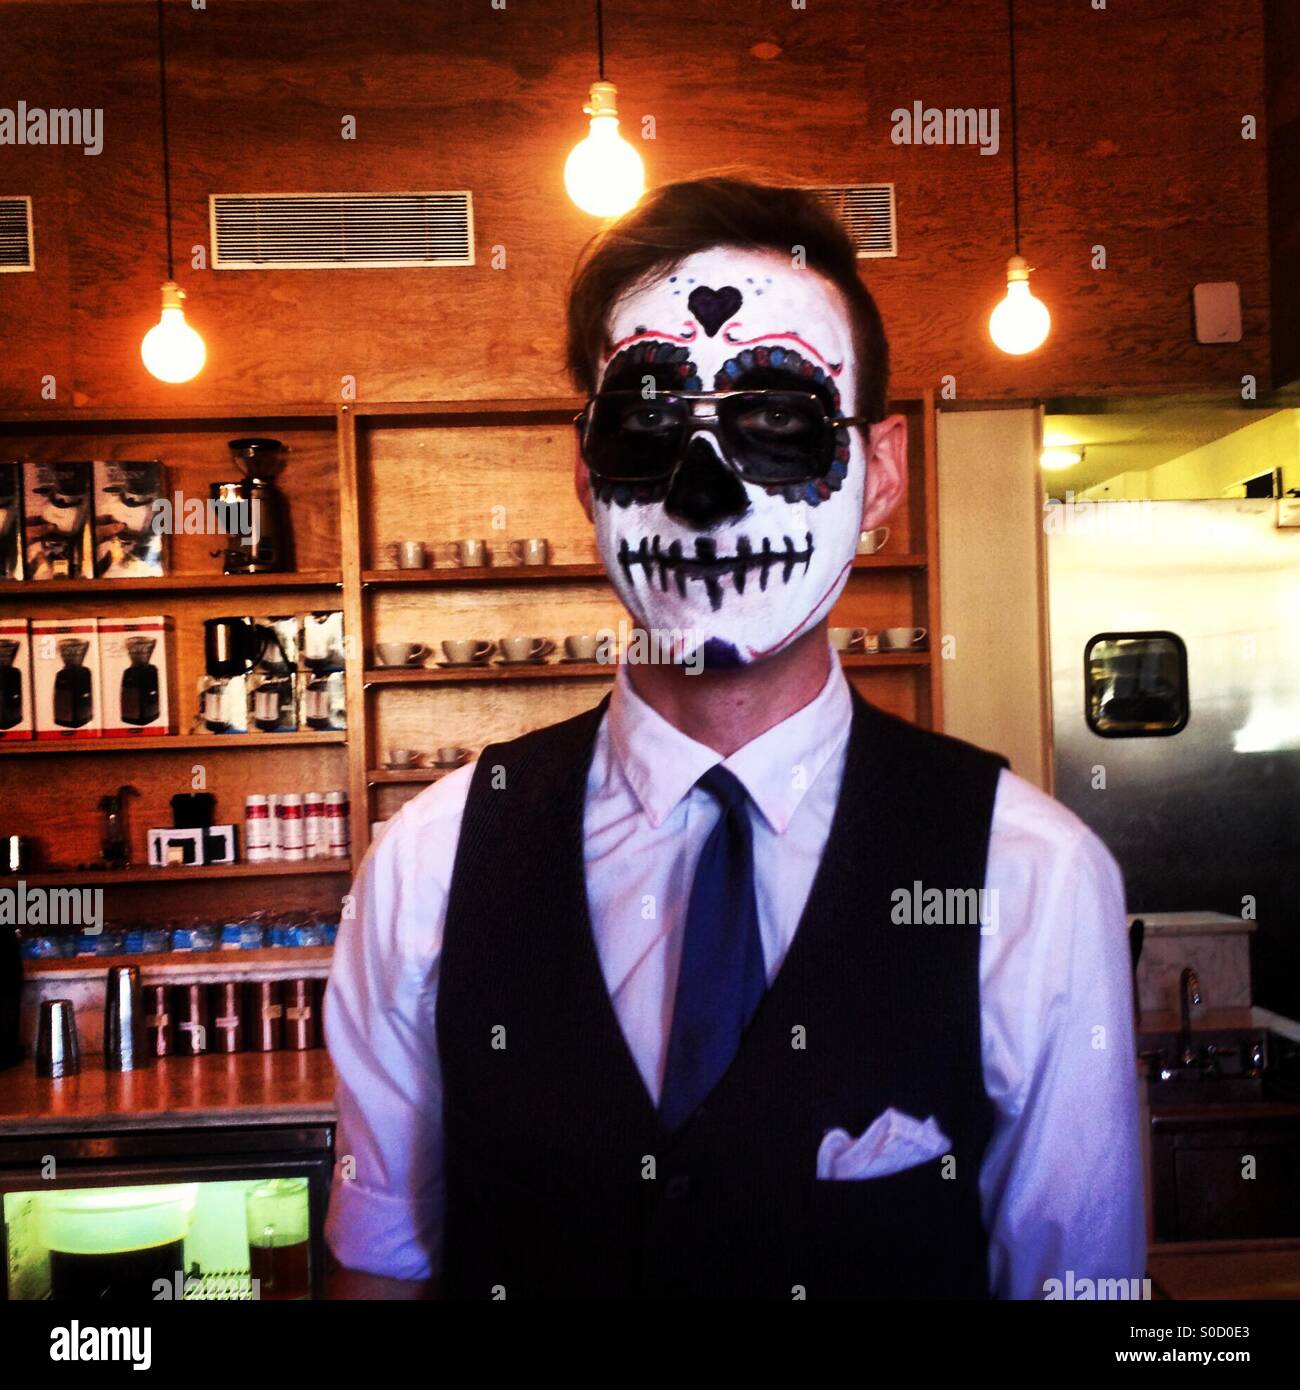 Barista with Day of the Dead mask Stock Photo